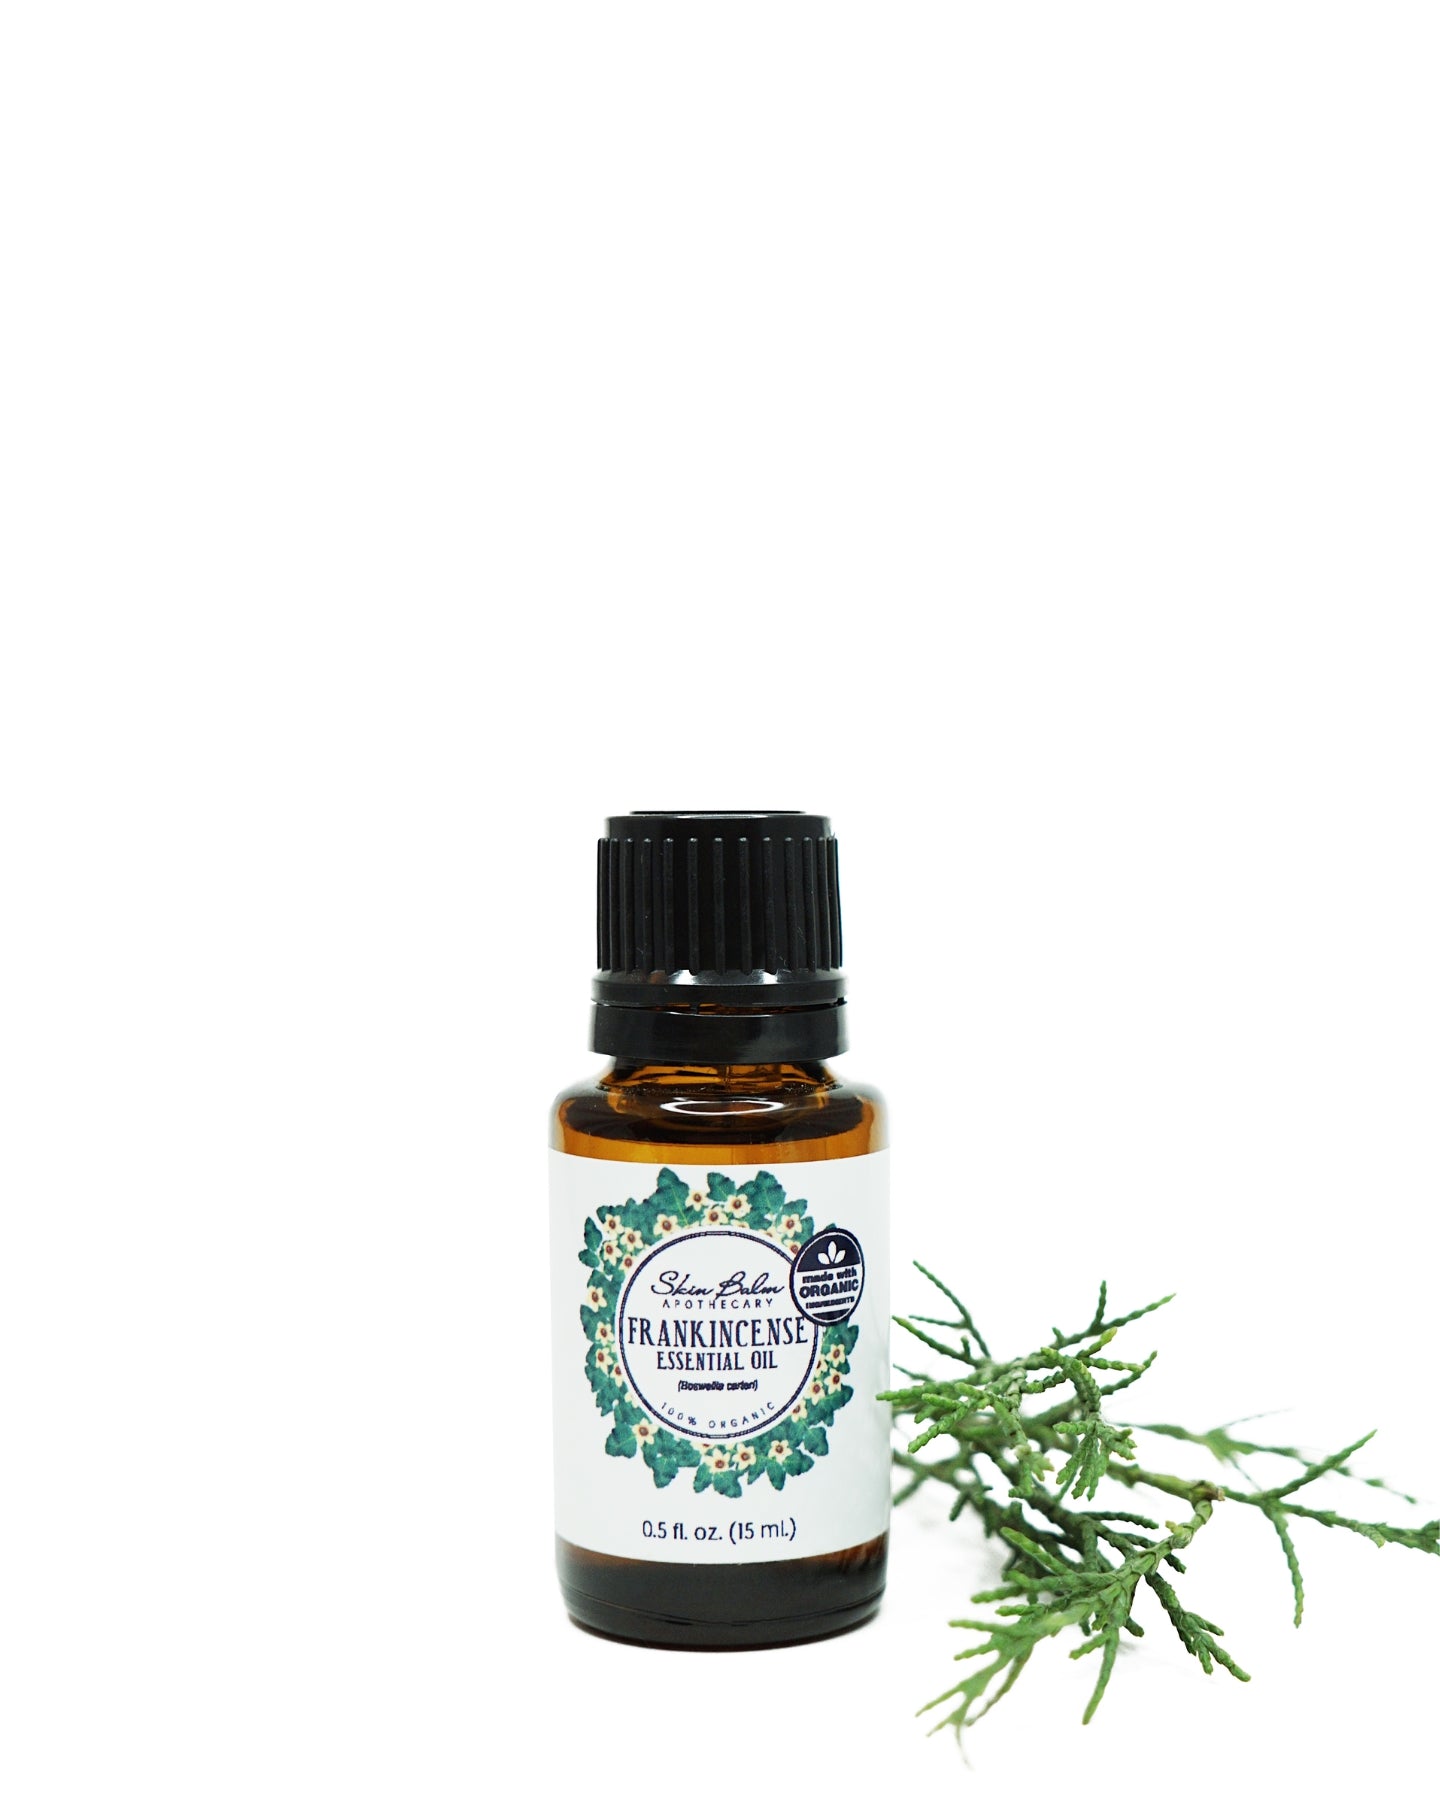 Organic Frankincense Essential Oil against a white background.